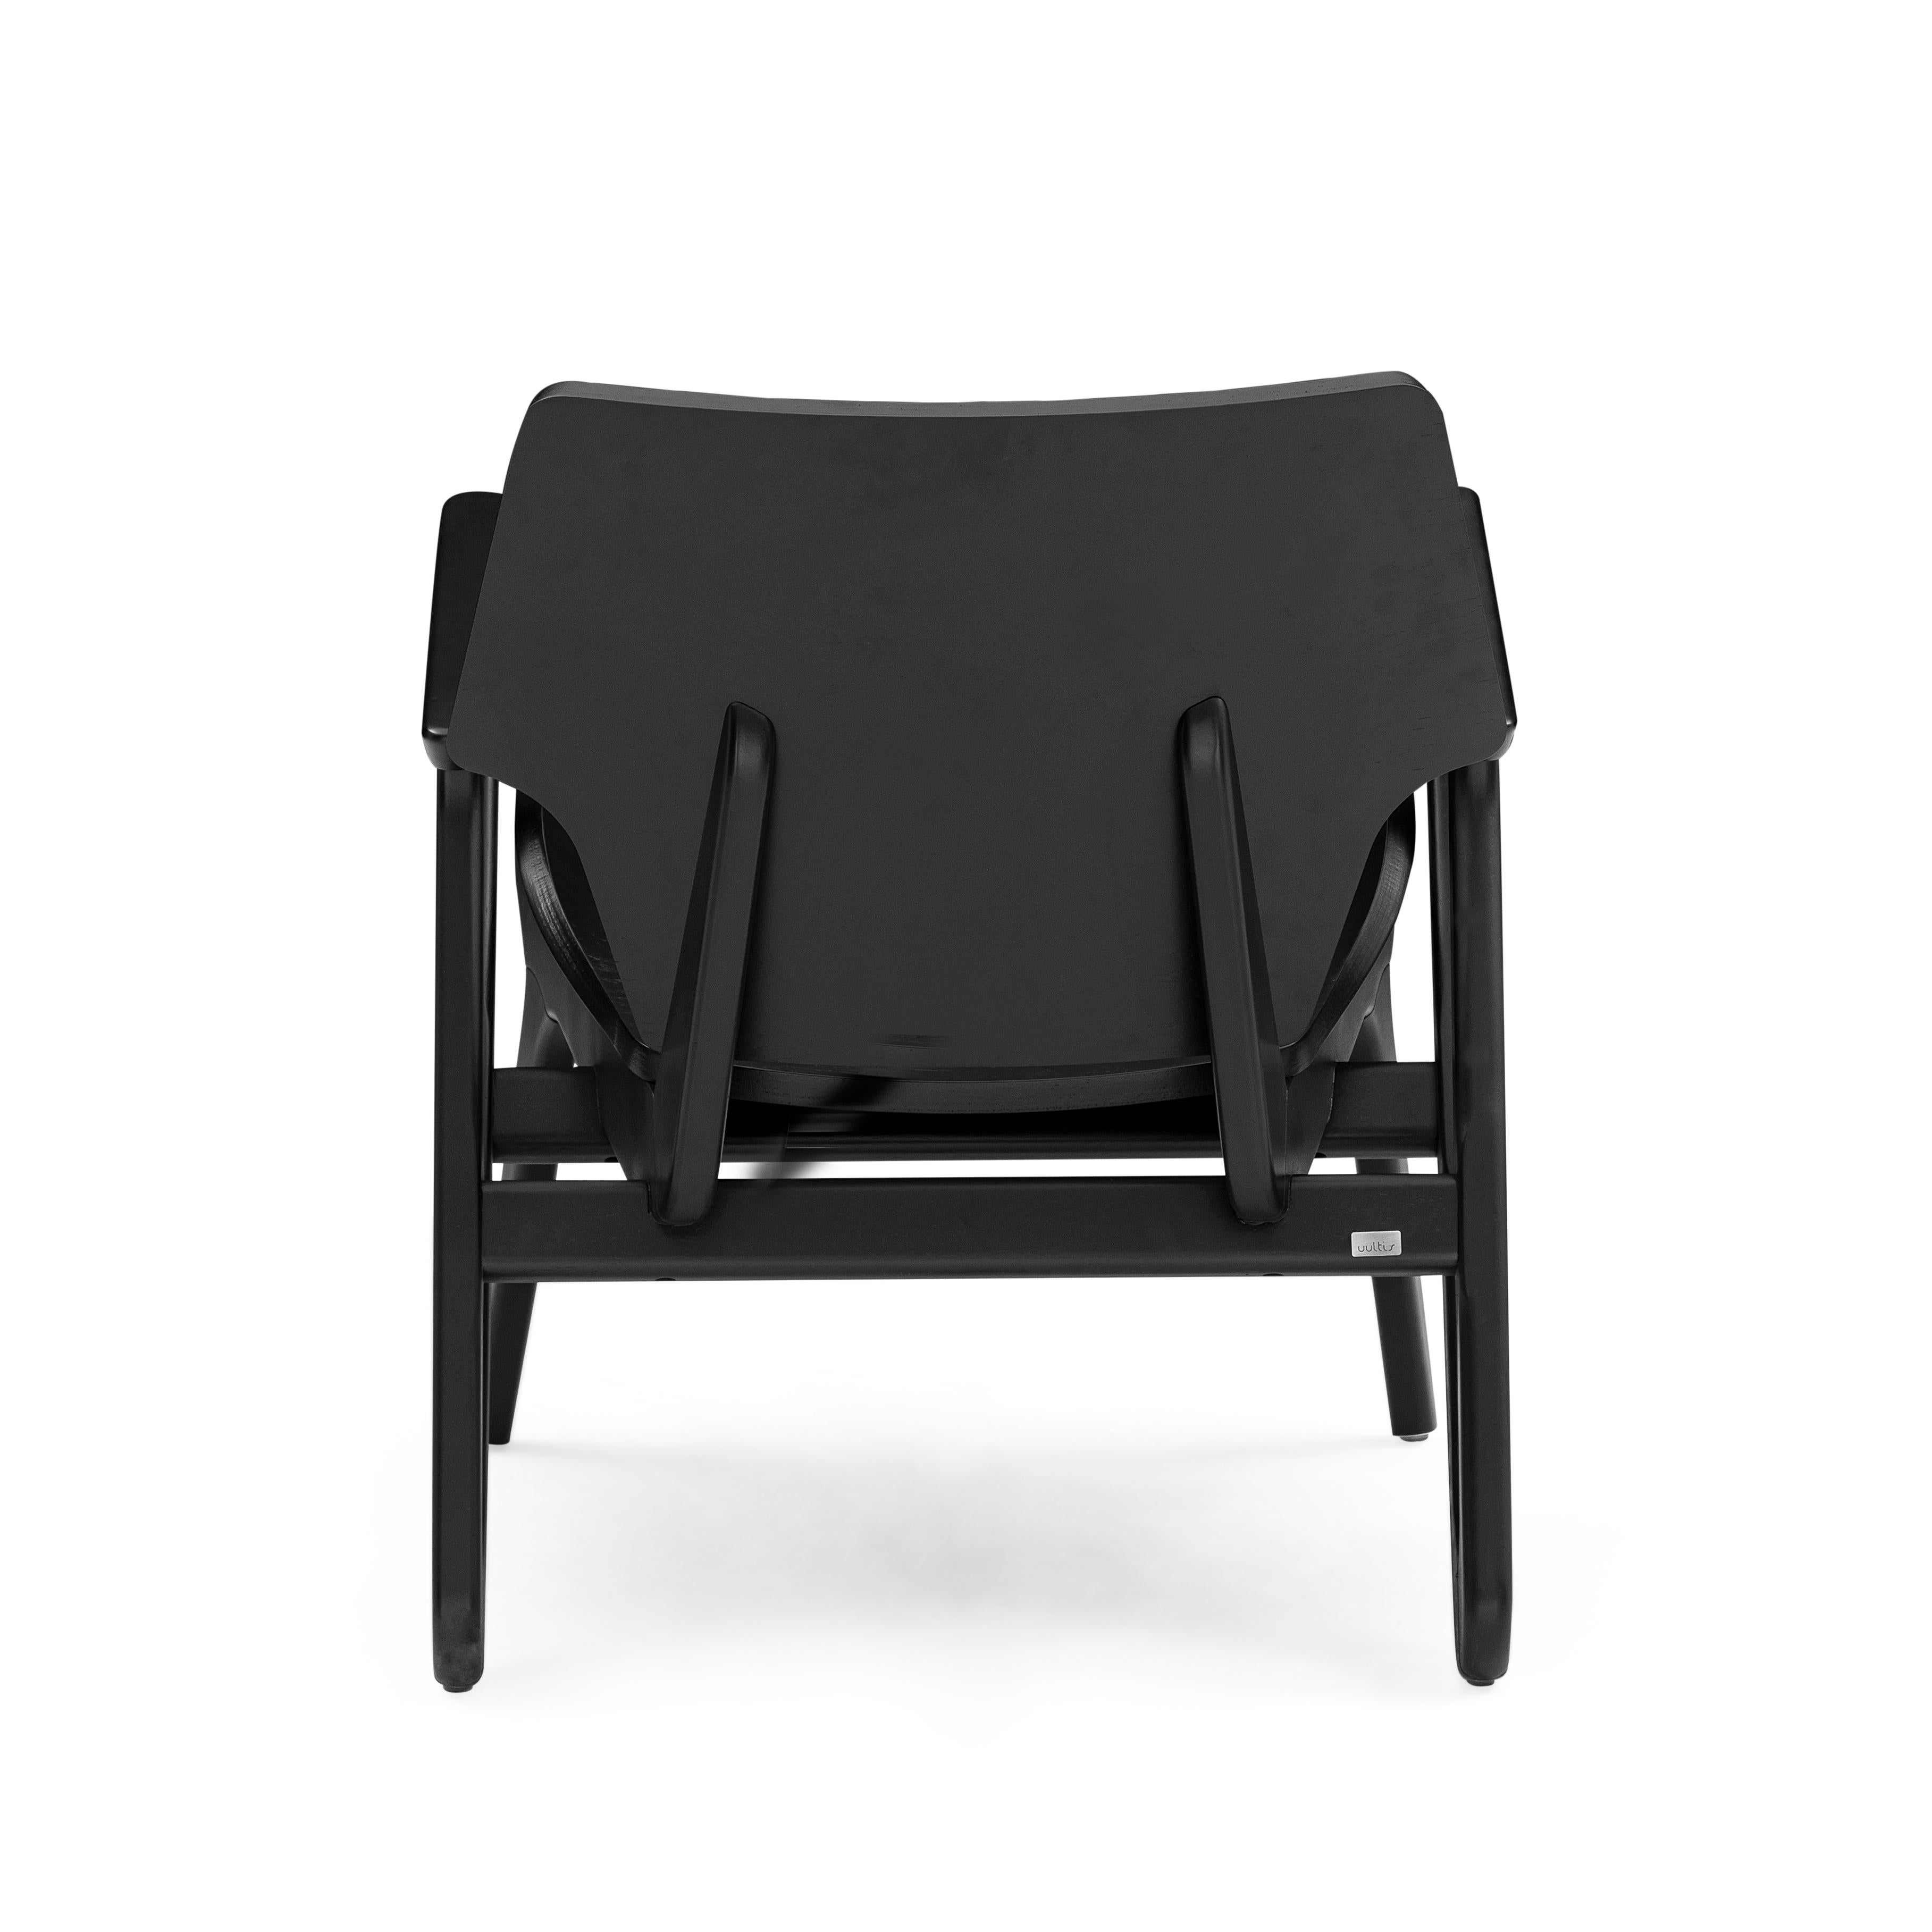 Velo Armchair with Shaped Seat and Shaped Back in Black Wood Finish In New Condition For Sale In Miami, FL